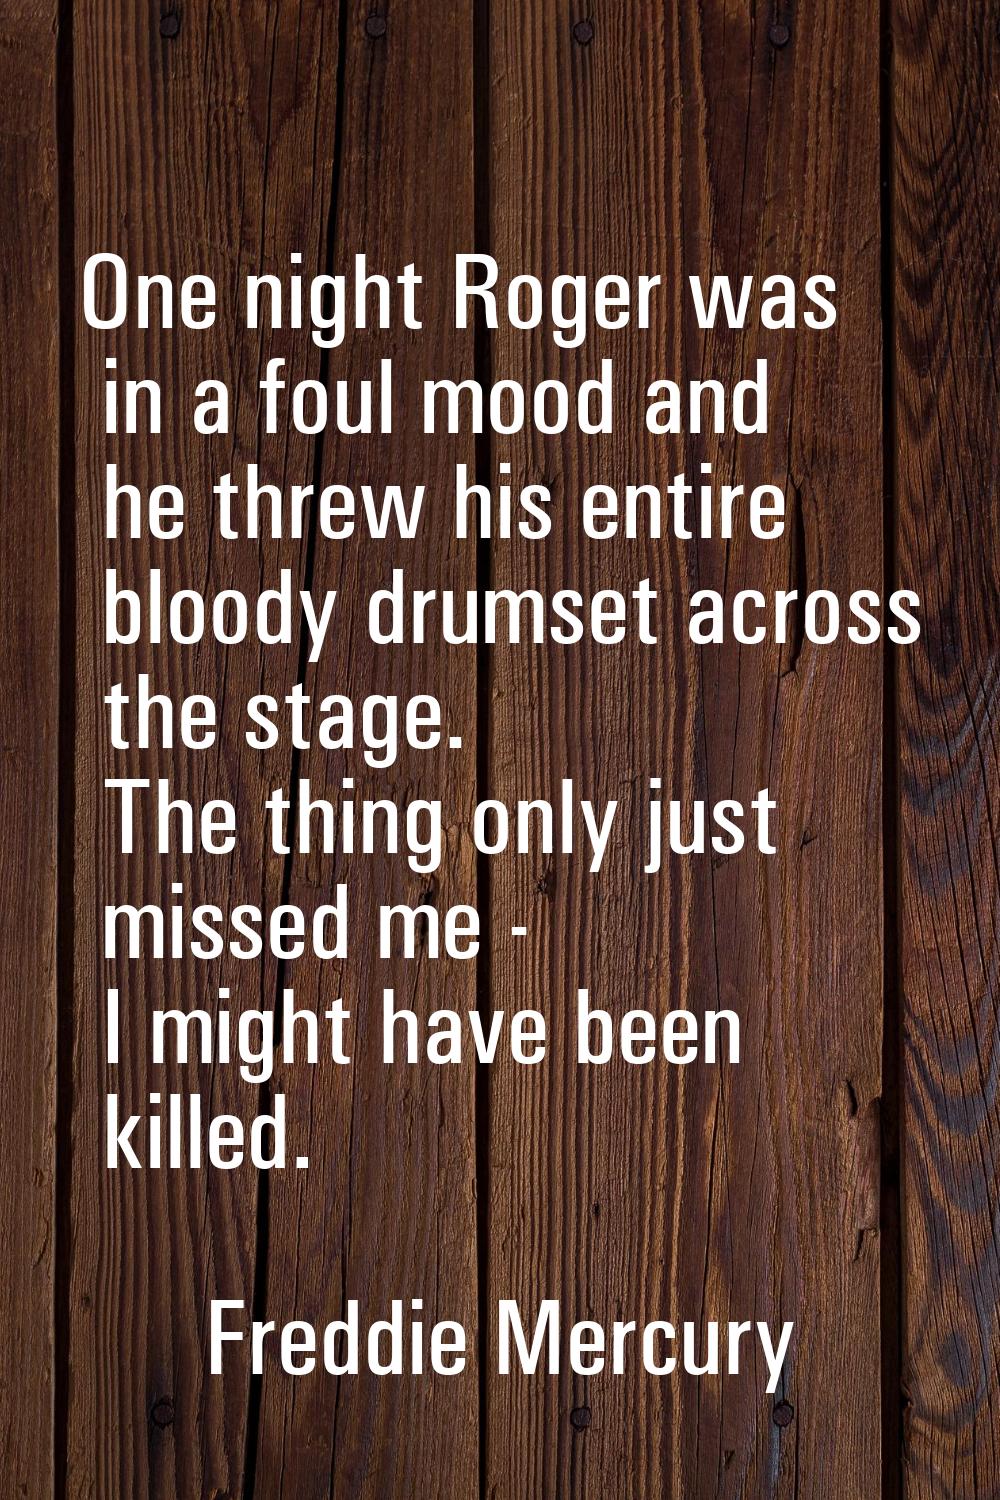 One night Roger was in a foul mood and he threw his entire bloody drumset across the stage. The thi